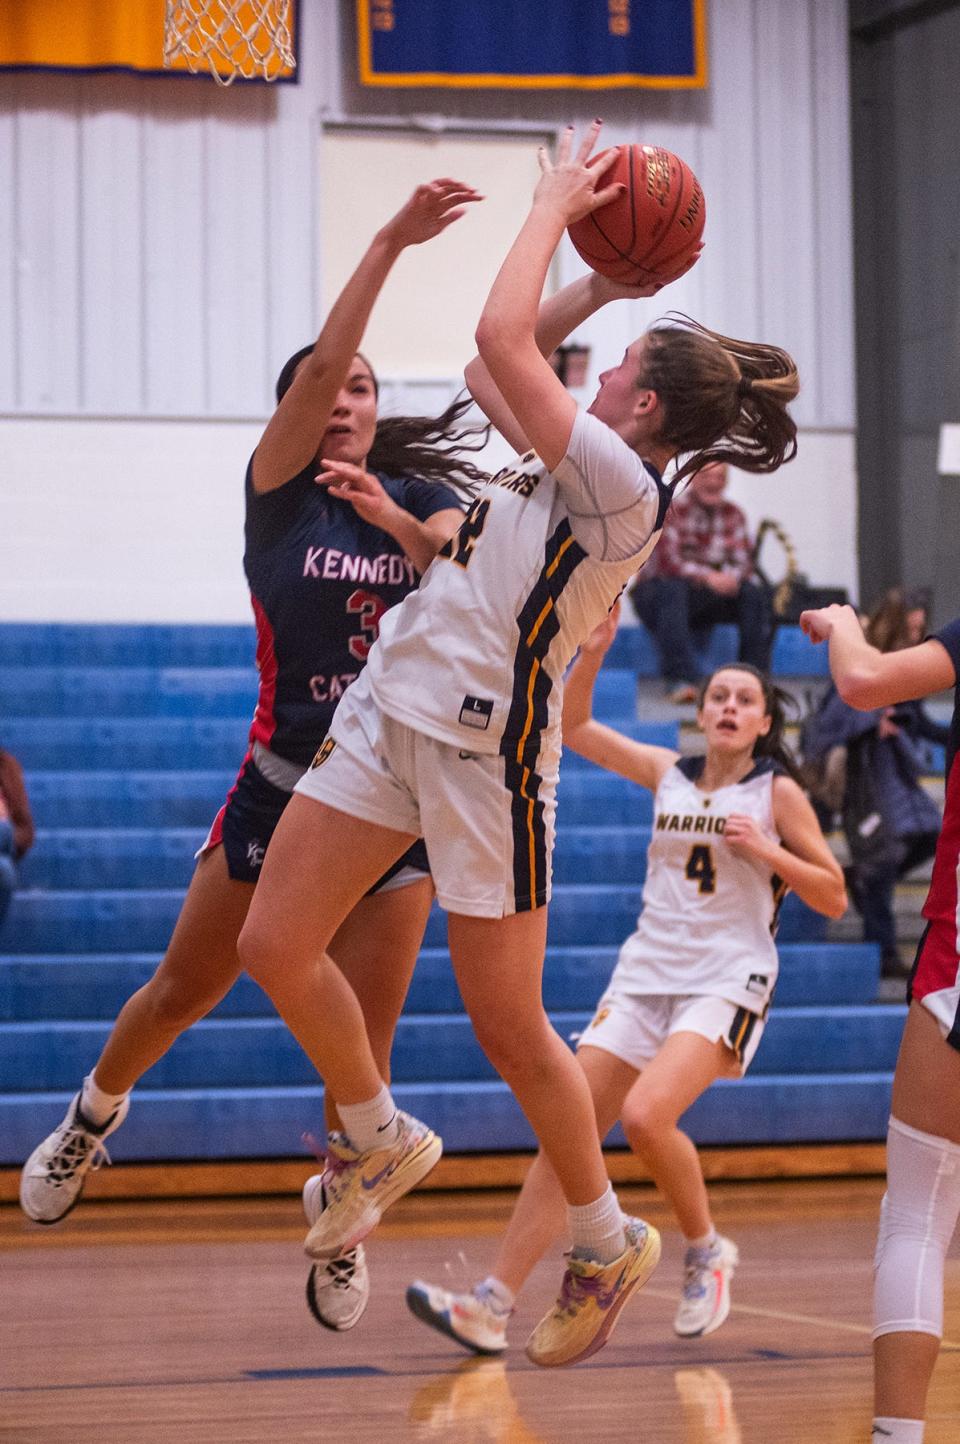 Lourdes' Simone Pelish, right, shoots during the girls basketball game at Our Lady of Lourdes High School in Poughkeepsie, NY on Saturday, December 9, 2023. Loudes defeated Kennedy 65-38. KELLY MARSH/FOR THE POUGHKEEPSIE JOURNAL